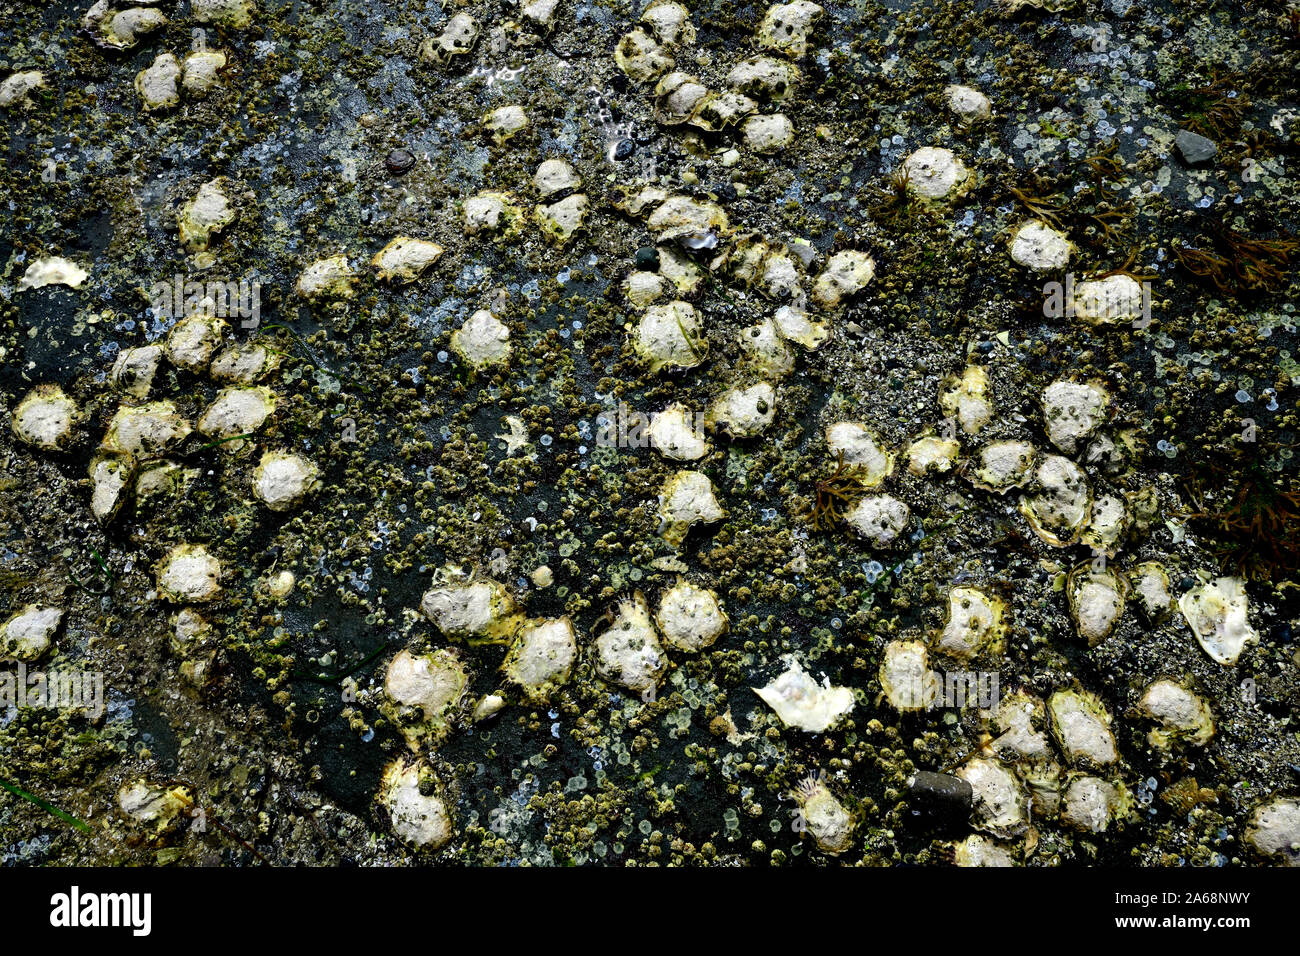 A bed of wild oysters clinging to a rocky shore on Vancouver Island British Columbia Canada Stock Photo